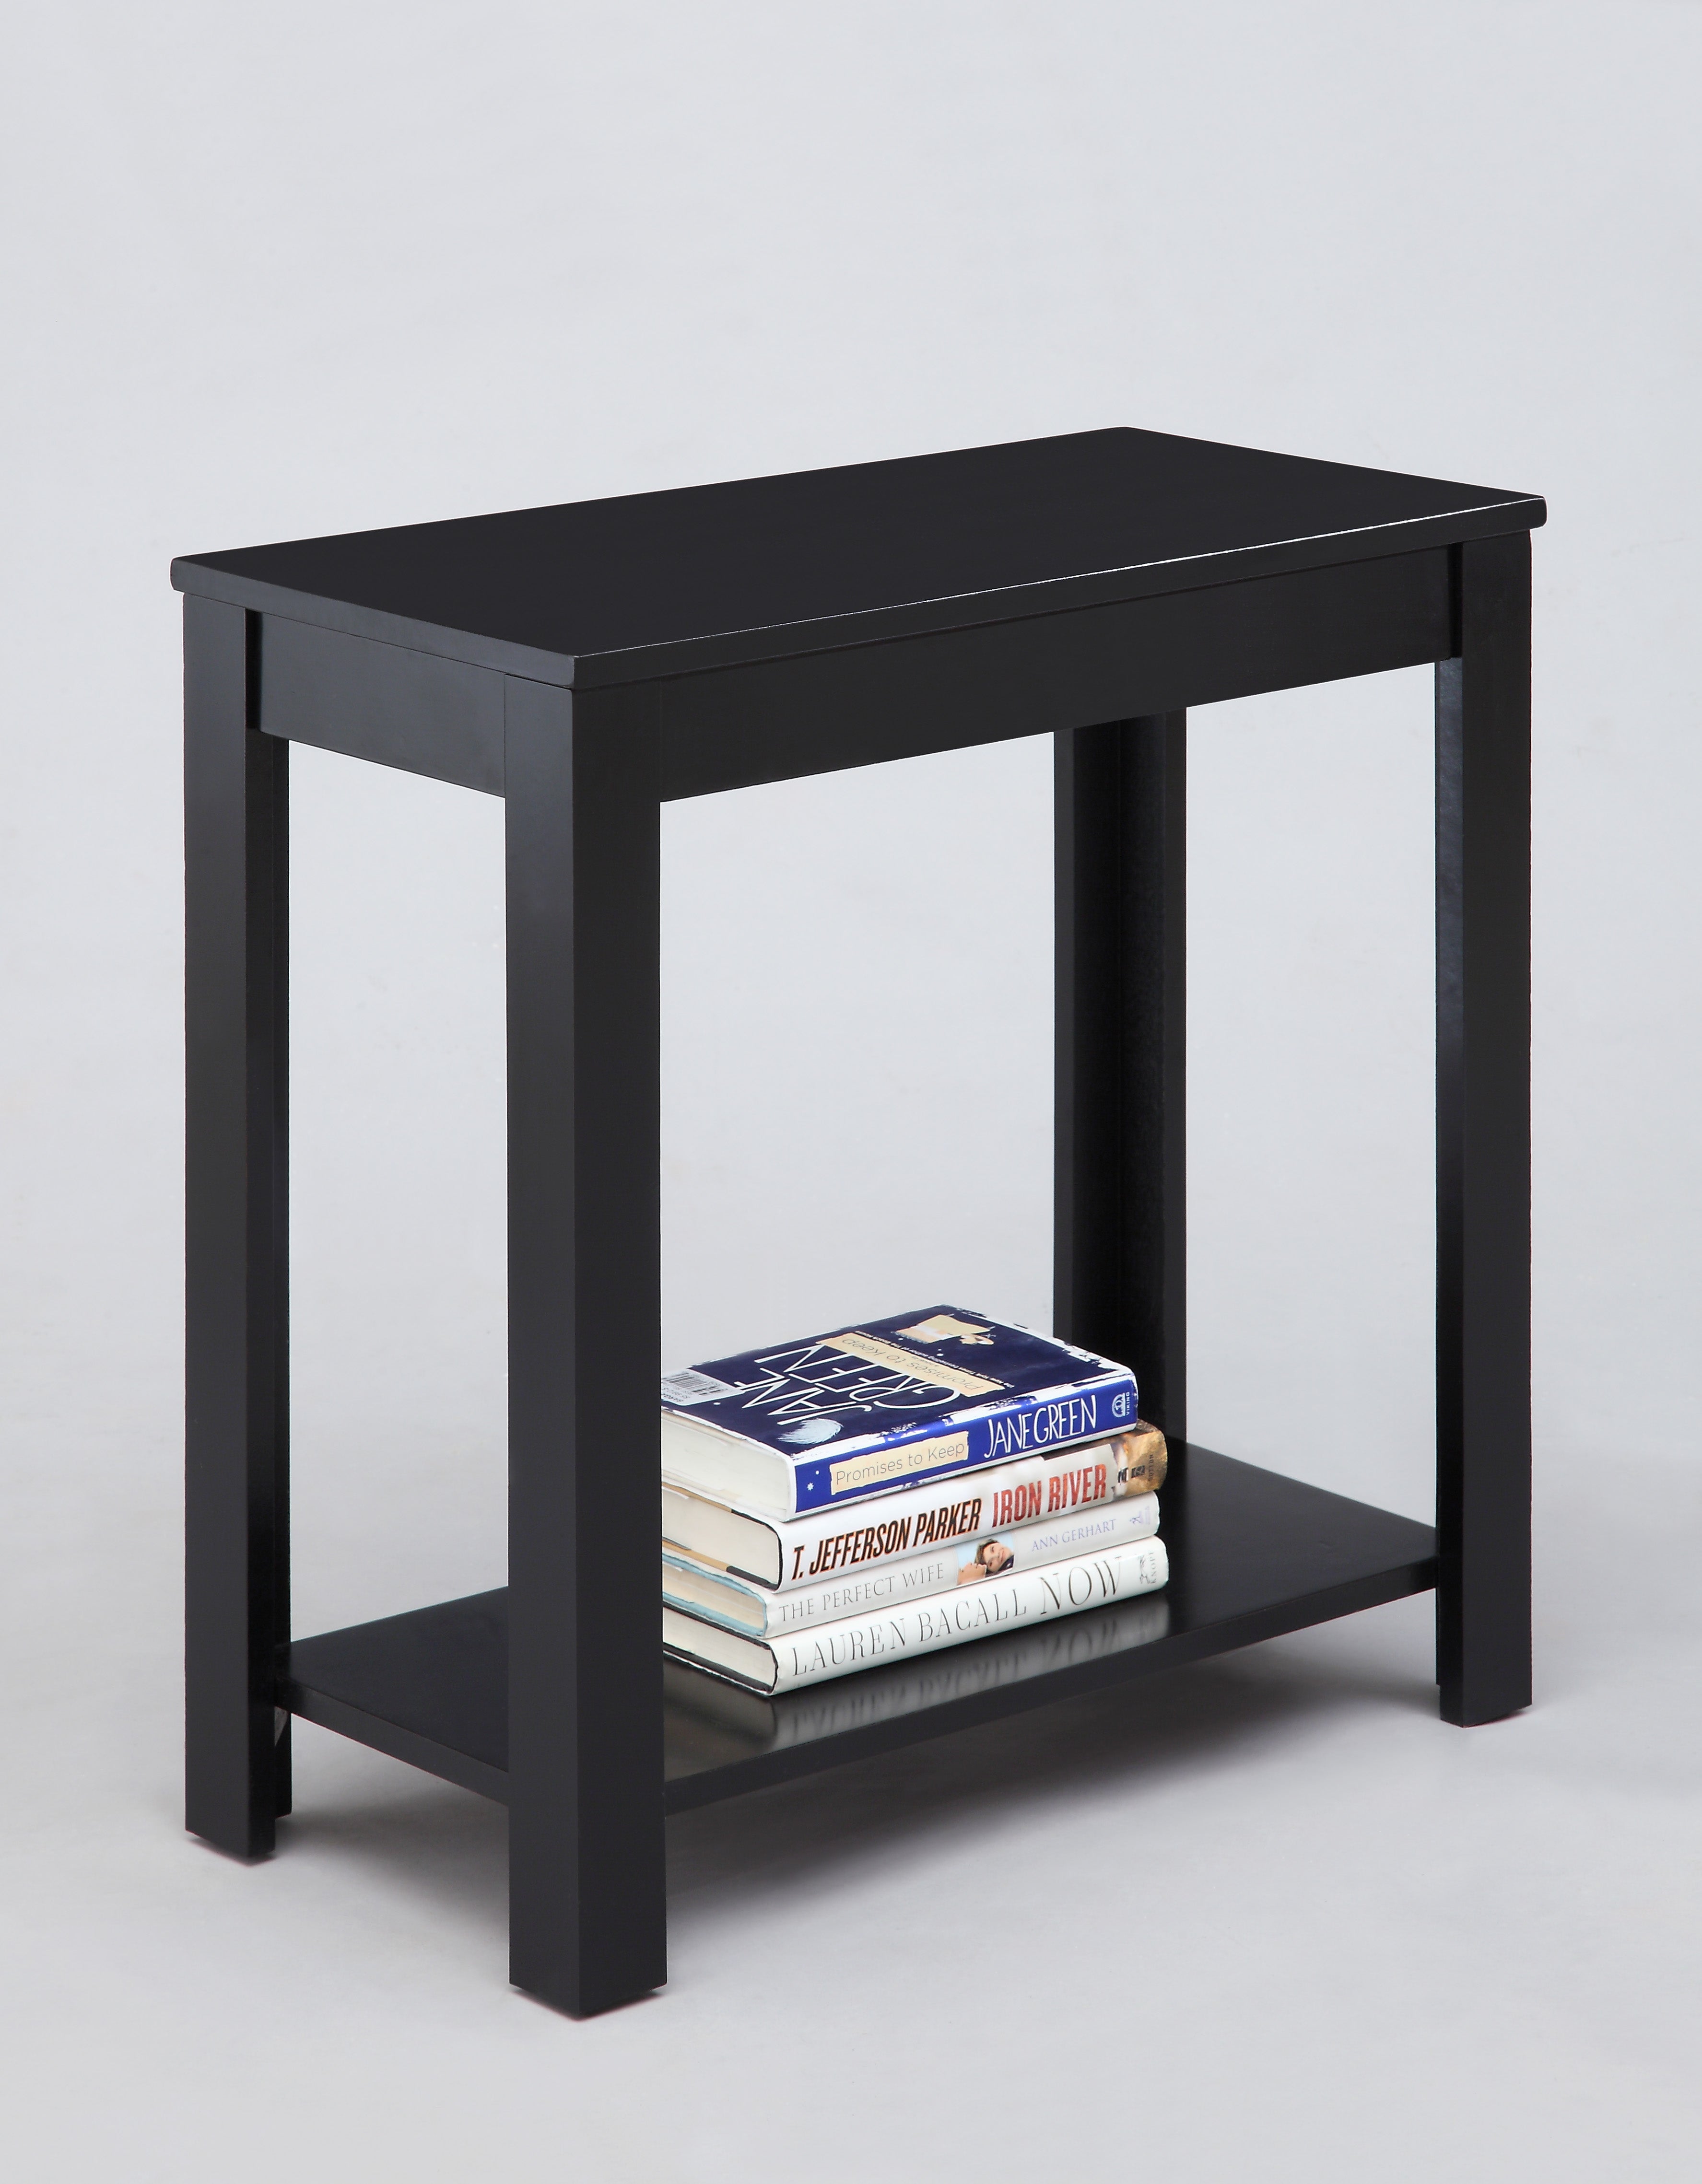 ZNTS Contemporary Chairside Table with Open Bottom Shelf 1Pc Side Table Black Finish Flat Table Top Solid B011119815